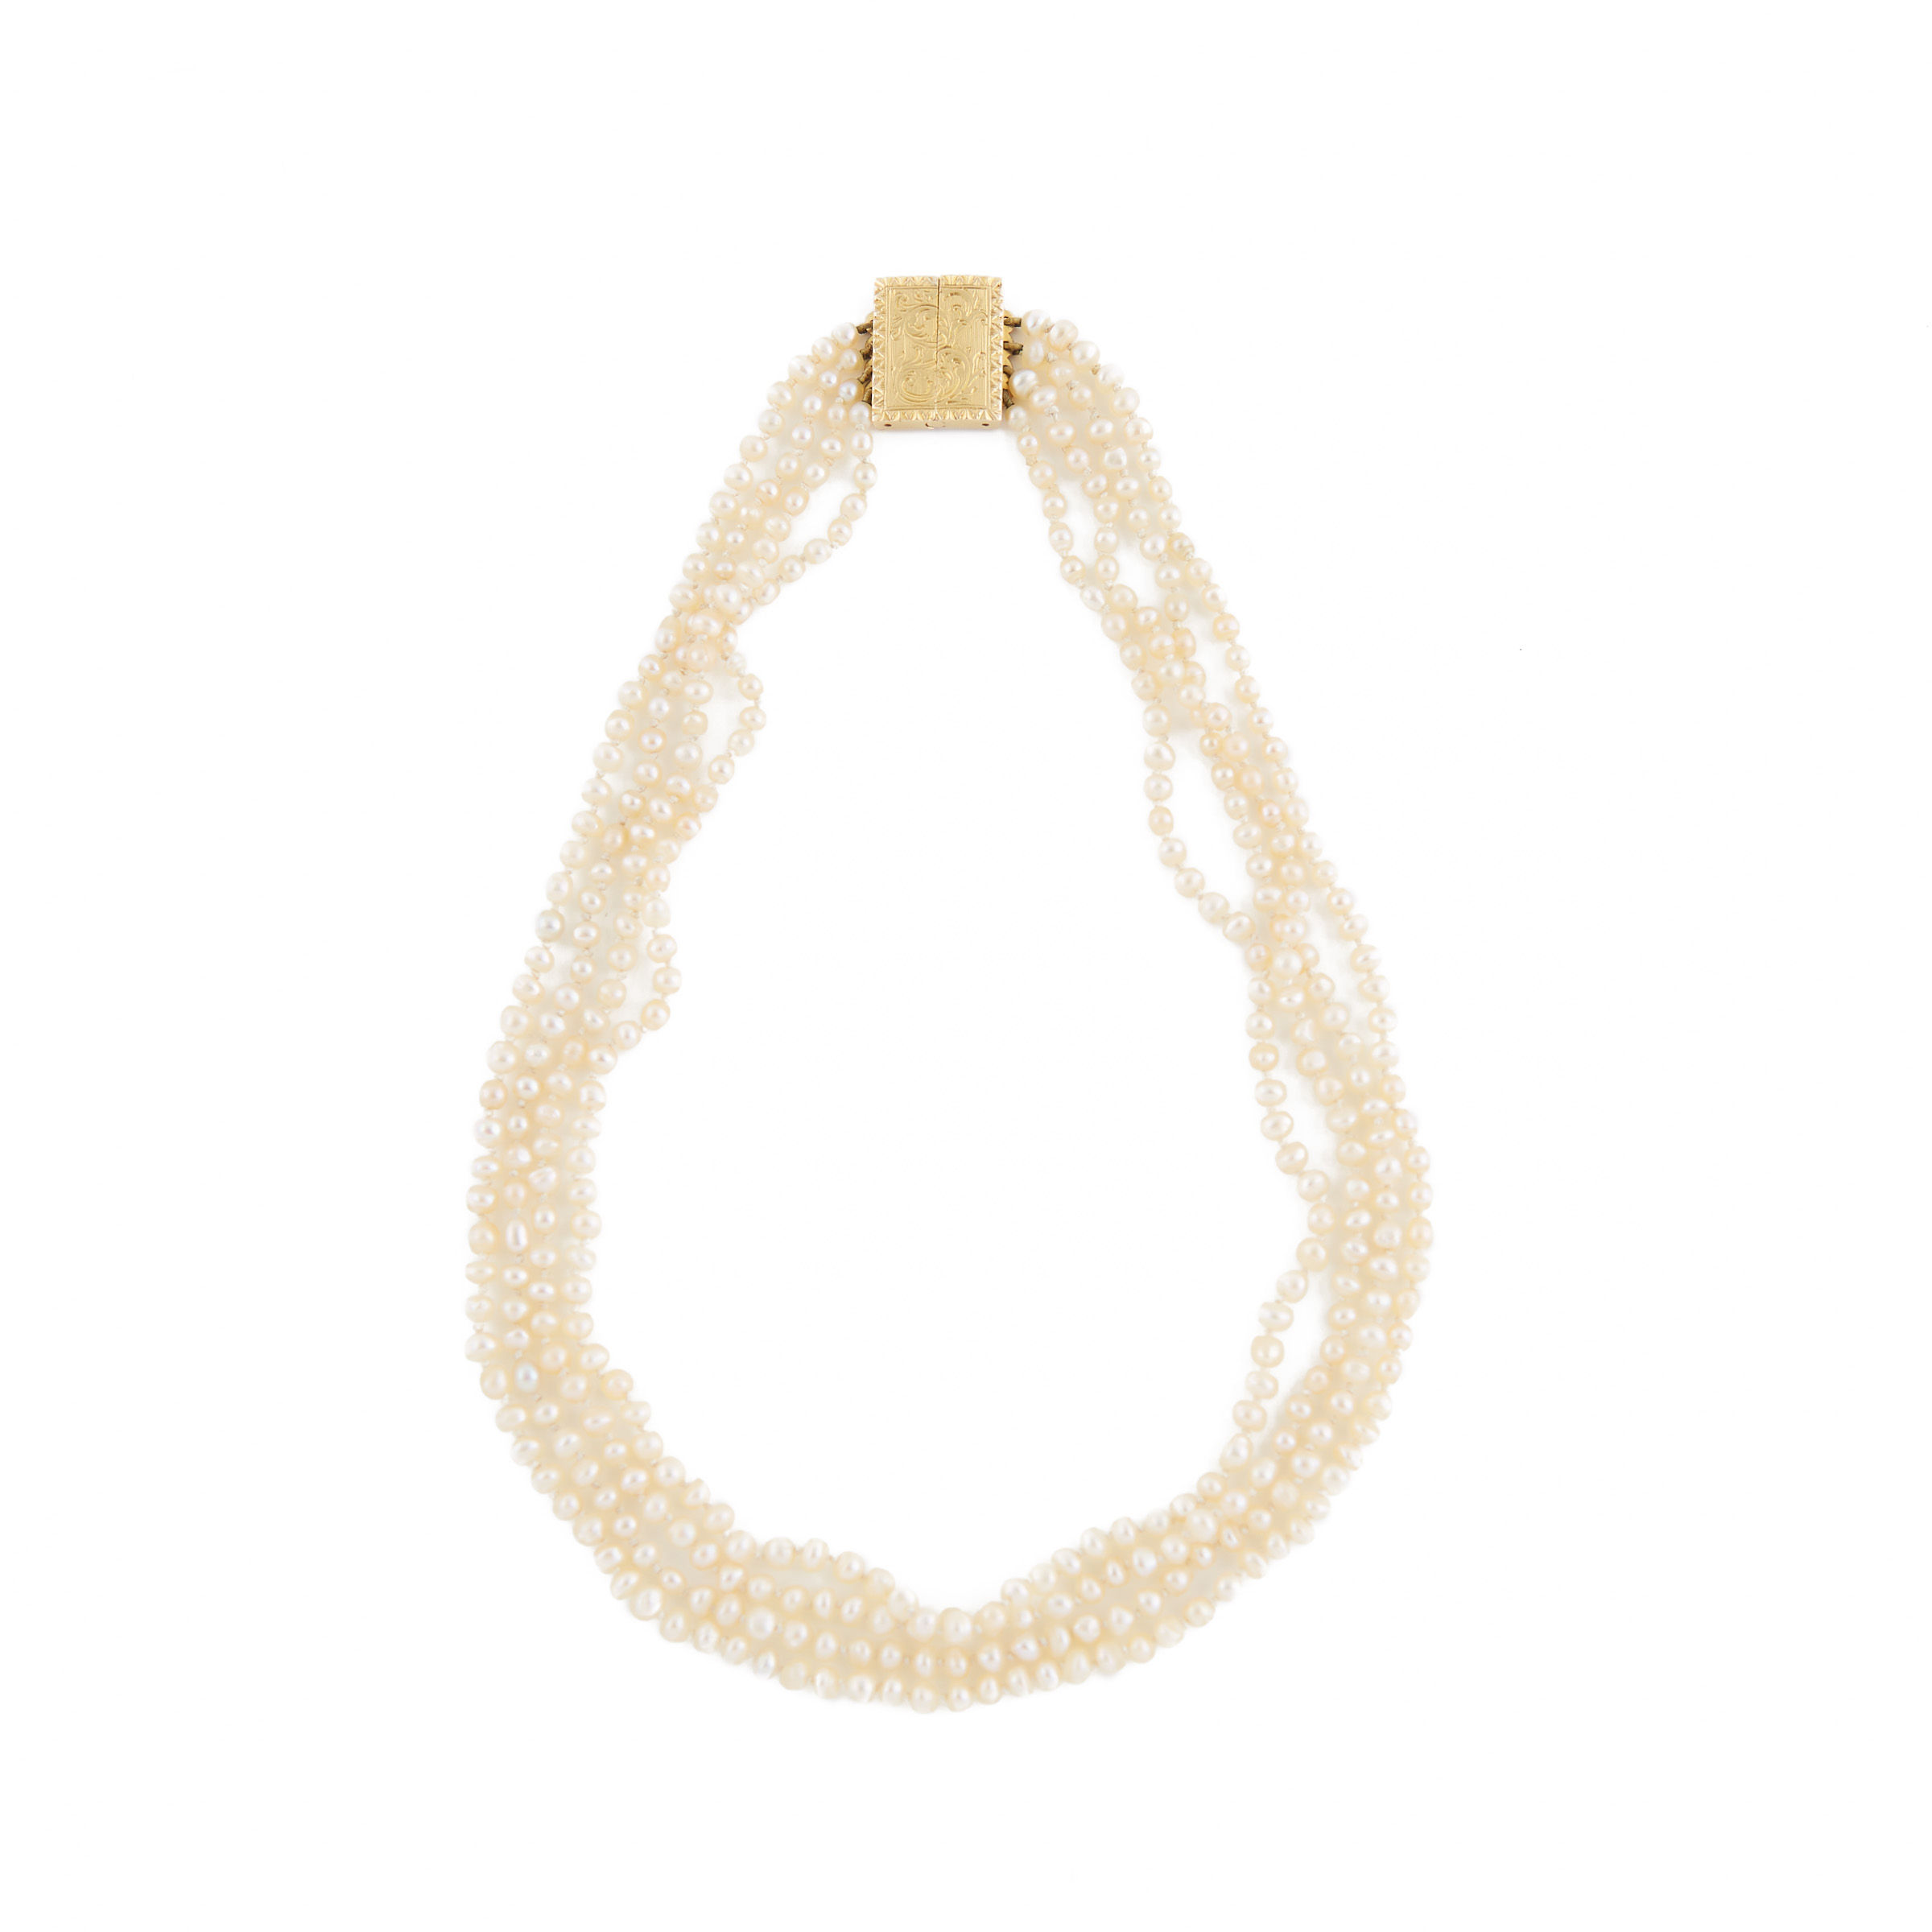 Four Strand Natural Pearl Necklace